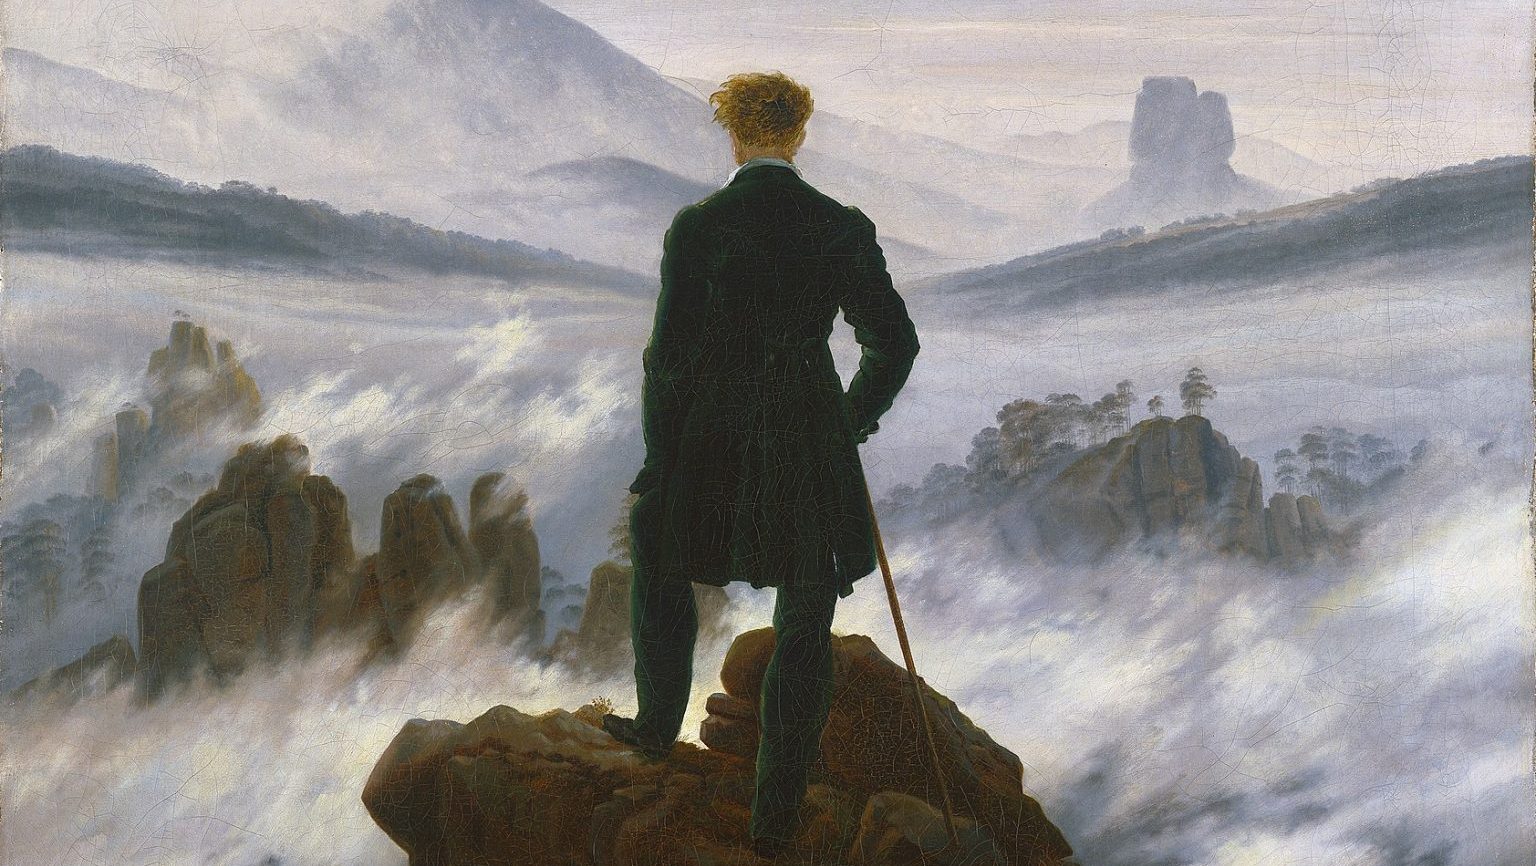 A person stands on a rocky peak, overlooking a foggy and mountainous landscape, holding a walking stick and facing away from the viewer, perhaps contemplating the nihilistic insignificance of human existence in the vastness of nature.